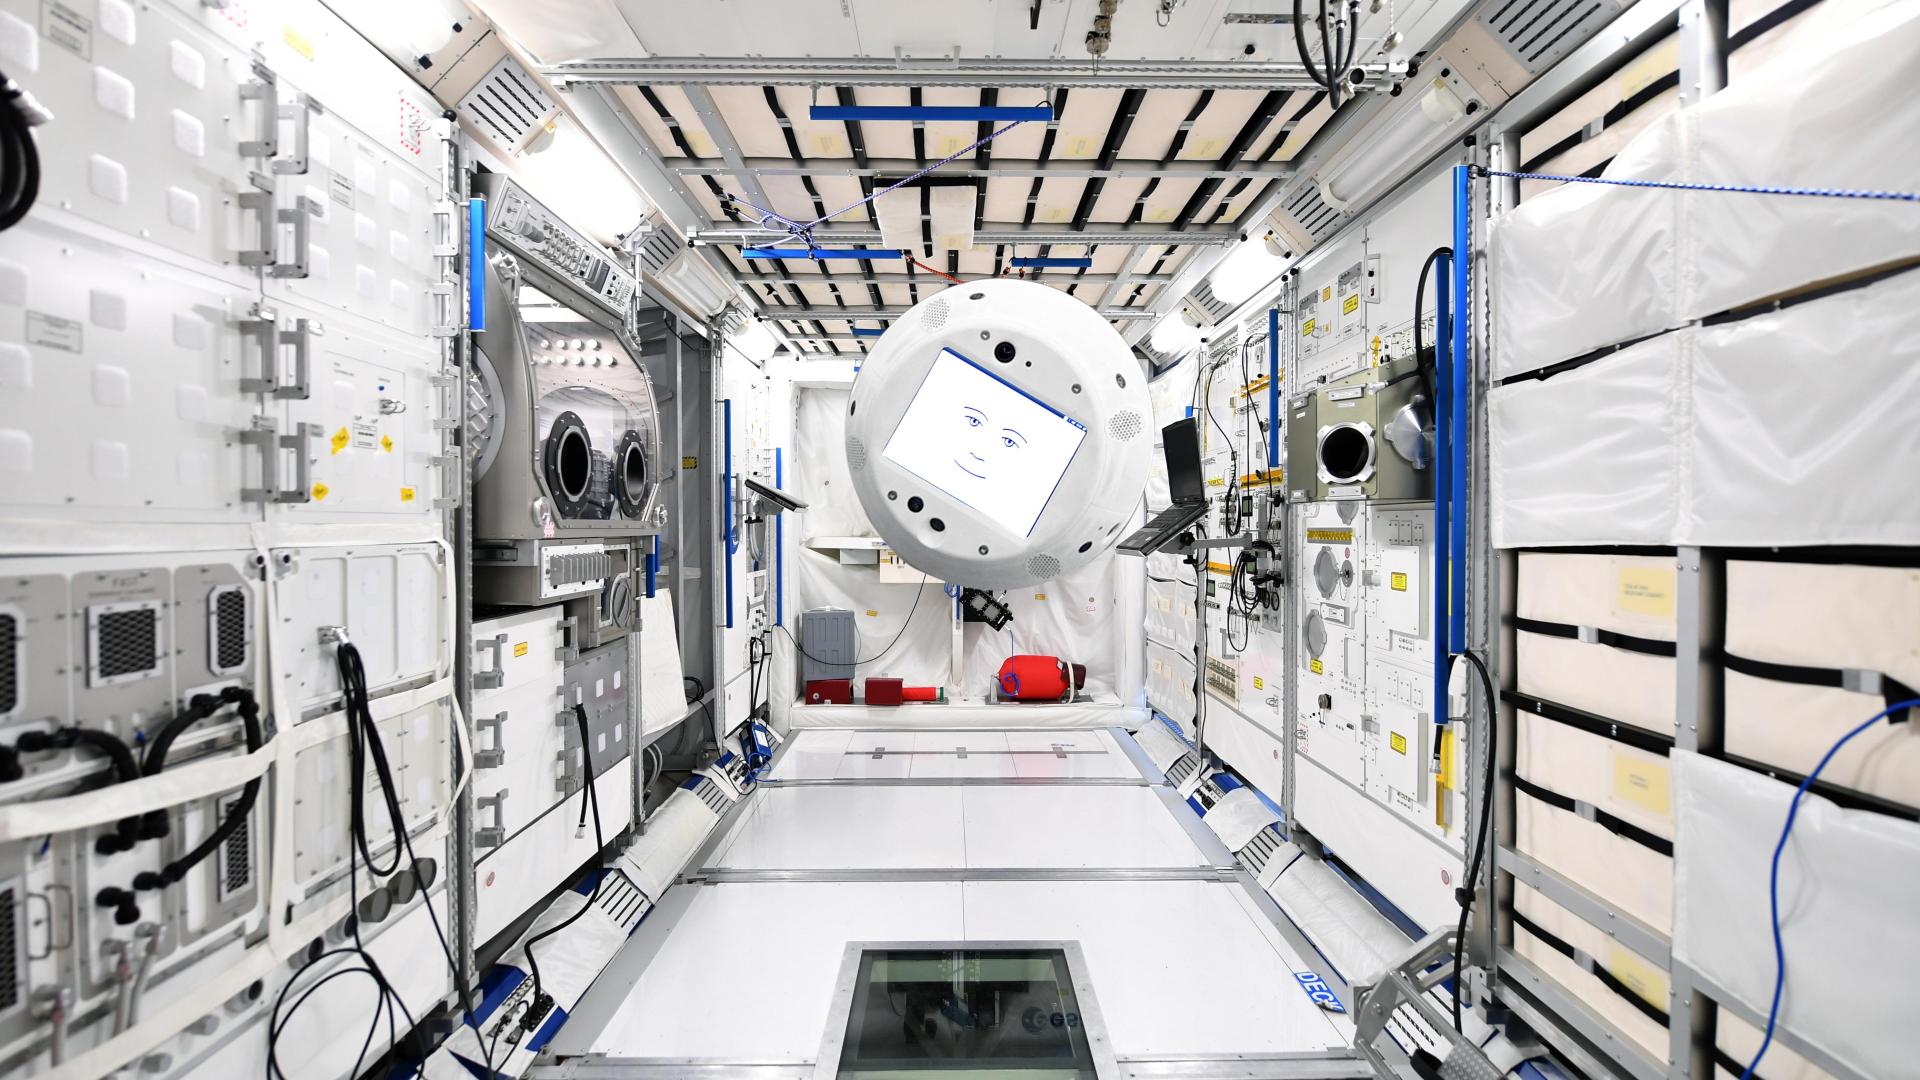 composite image of a robot floating in the station